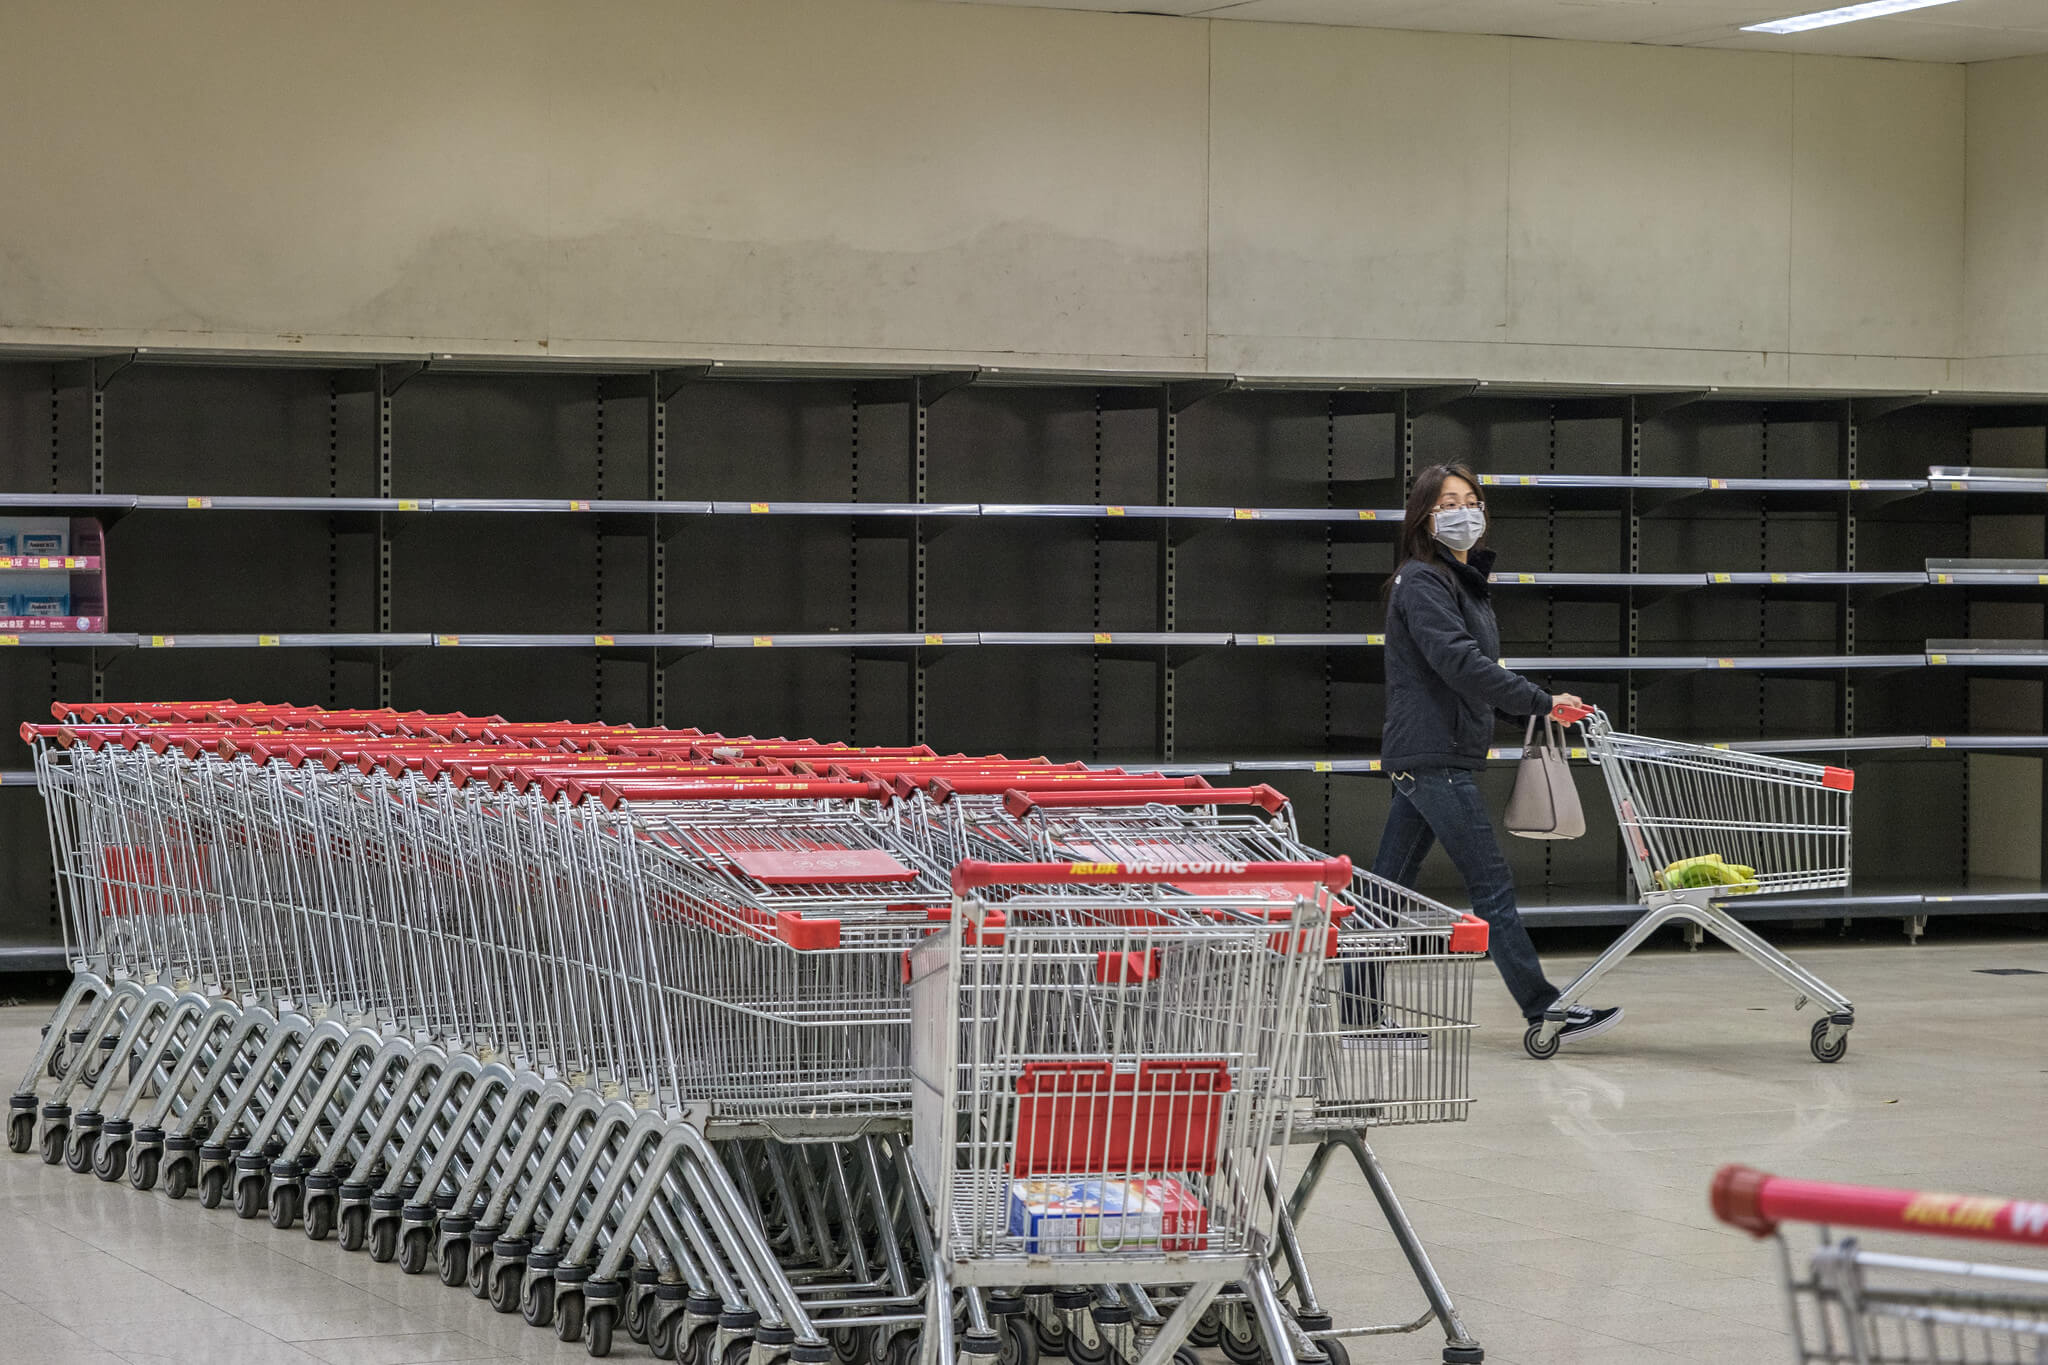 A supermarket in the city of Wuhan, almost empty due to the corona-crisis. © Studio Incendo/Flickr